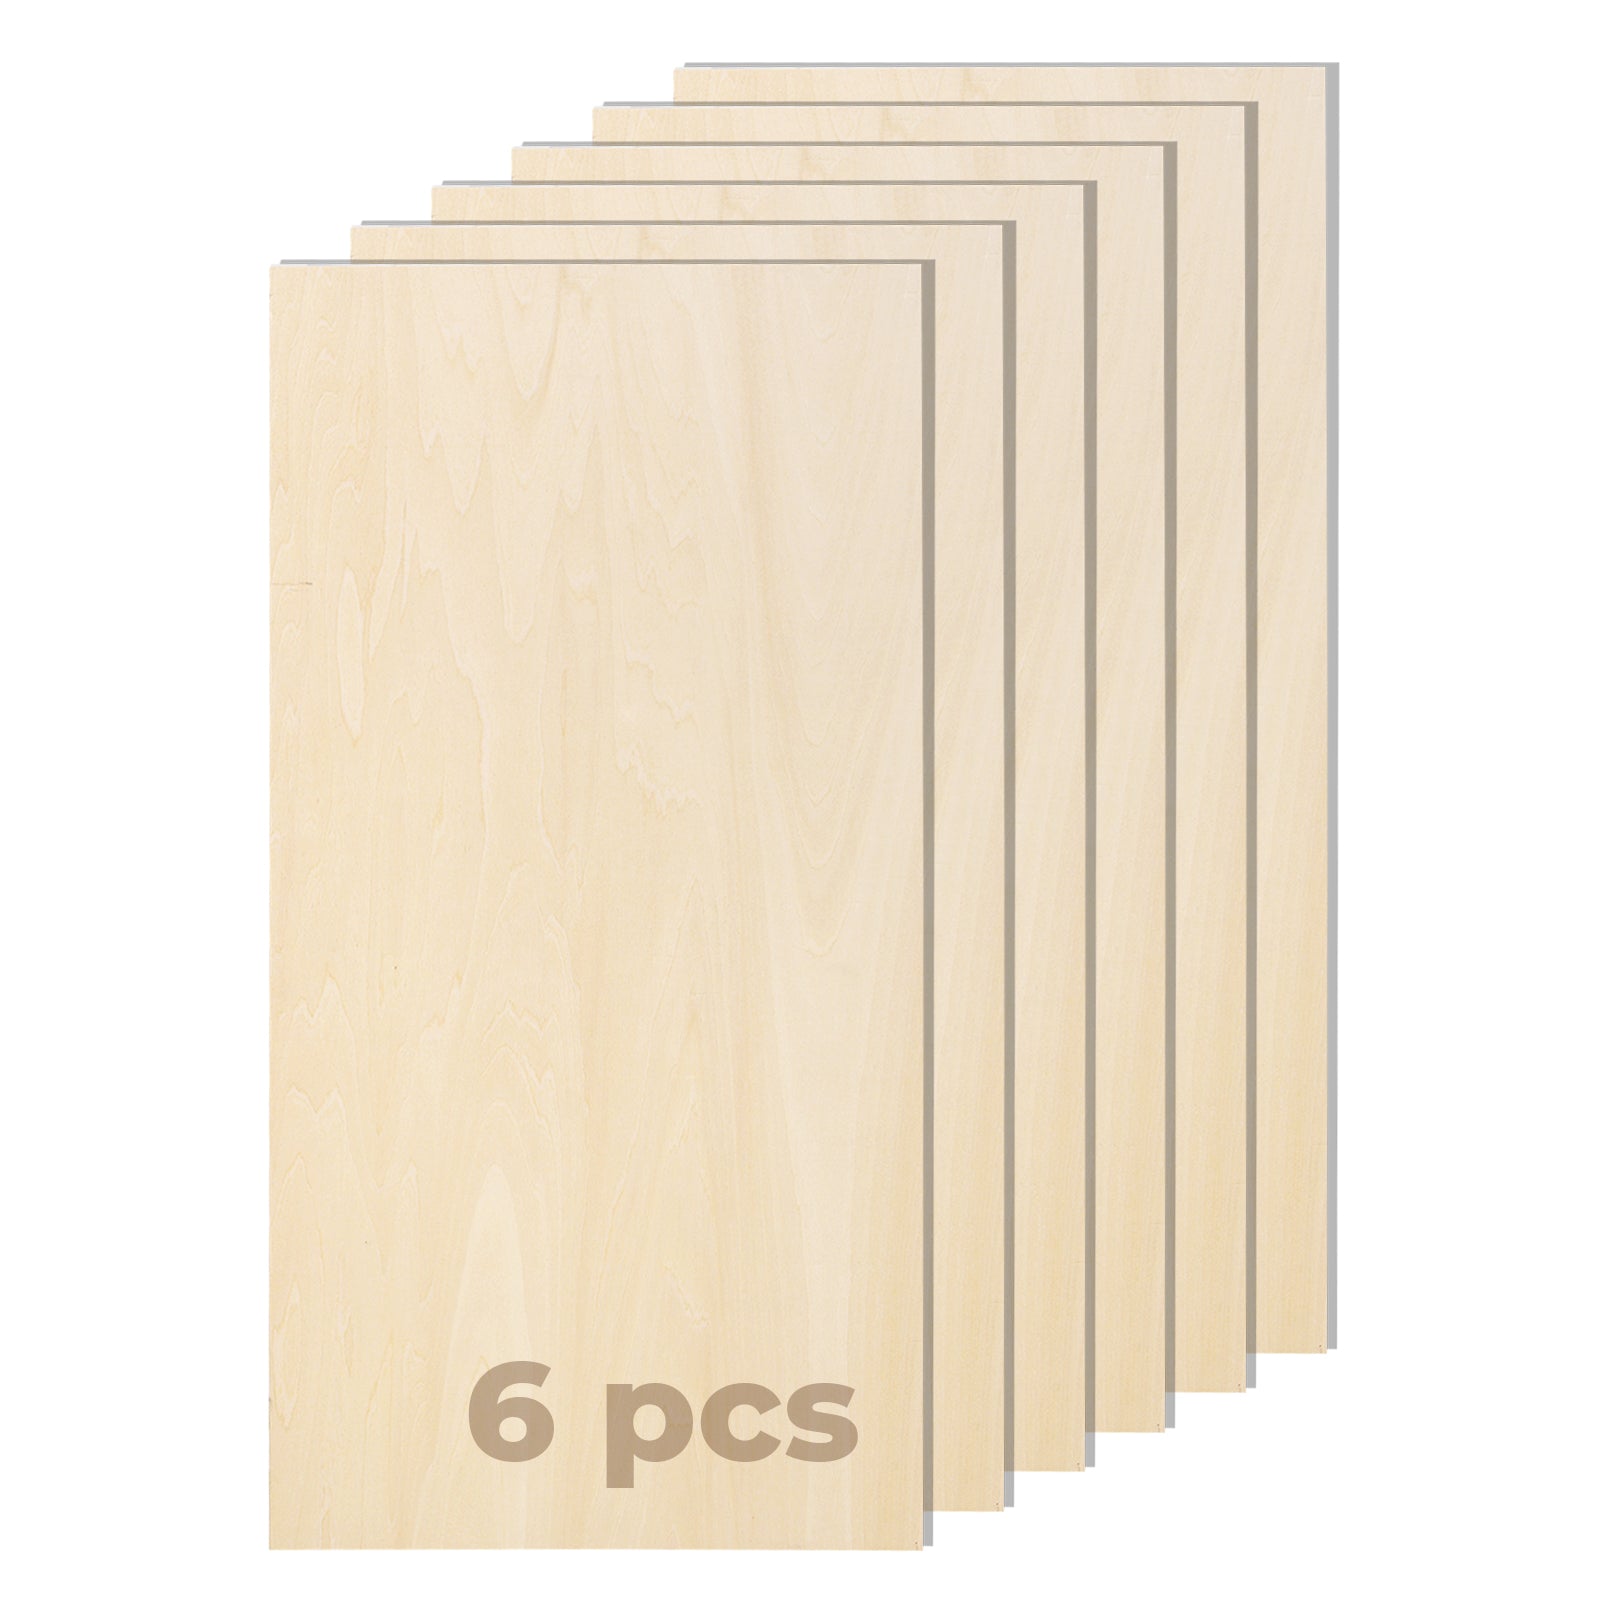 6 Pack Basswood Sheets 12 x 18 x 1/8 Inch-3 mm Unfinished Plywood for Craft  Thin Wood Boards Sheets Rectangle Wood Panels for DIY School Projects